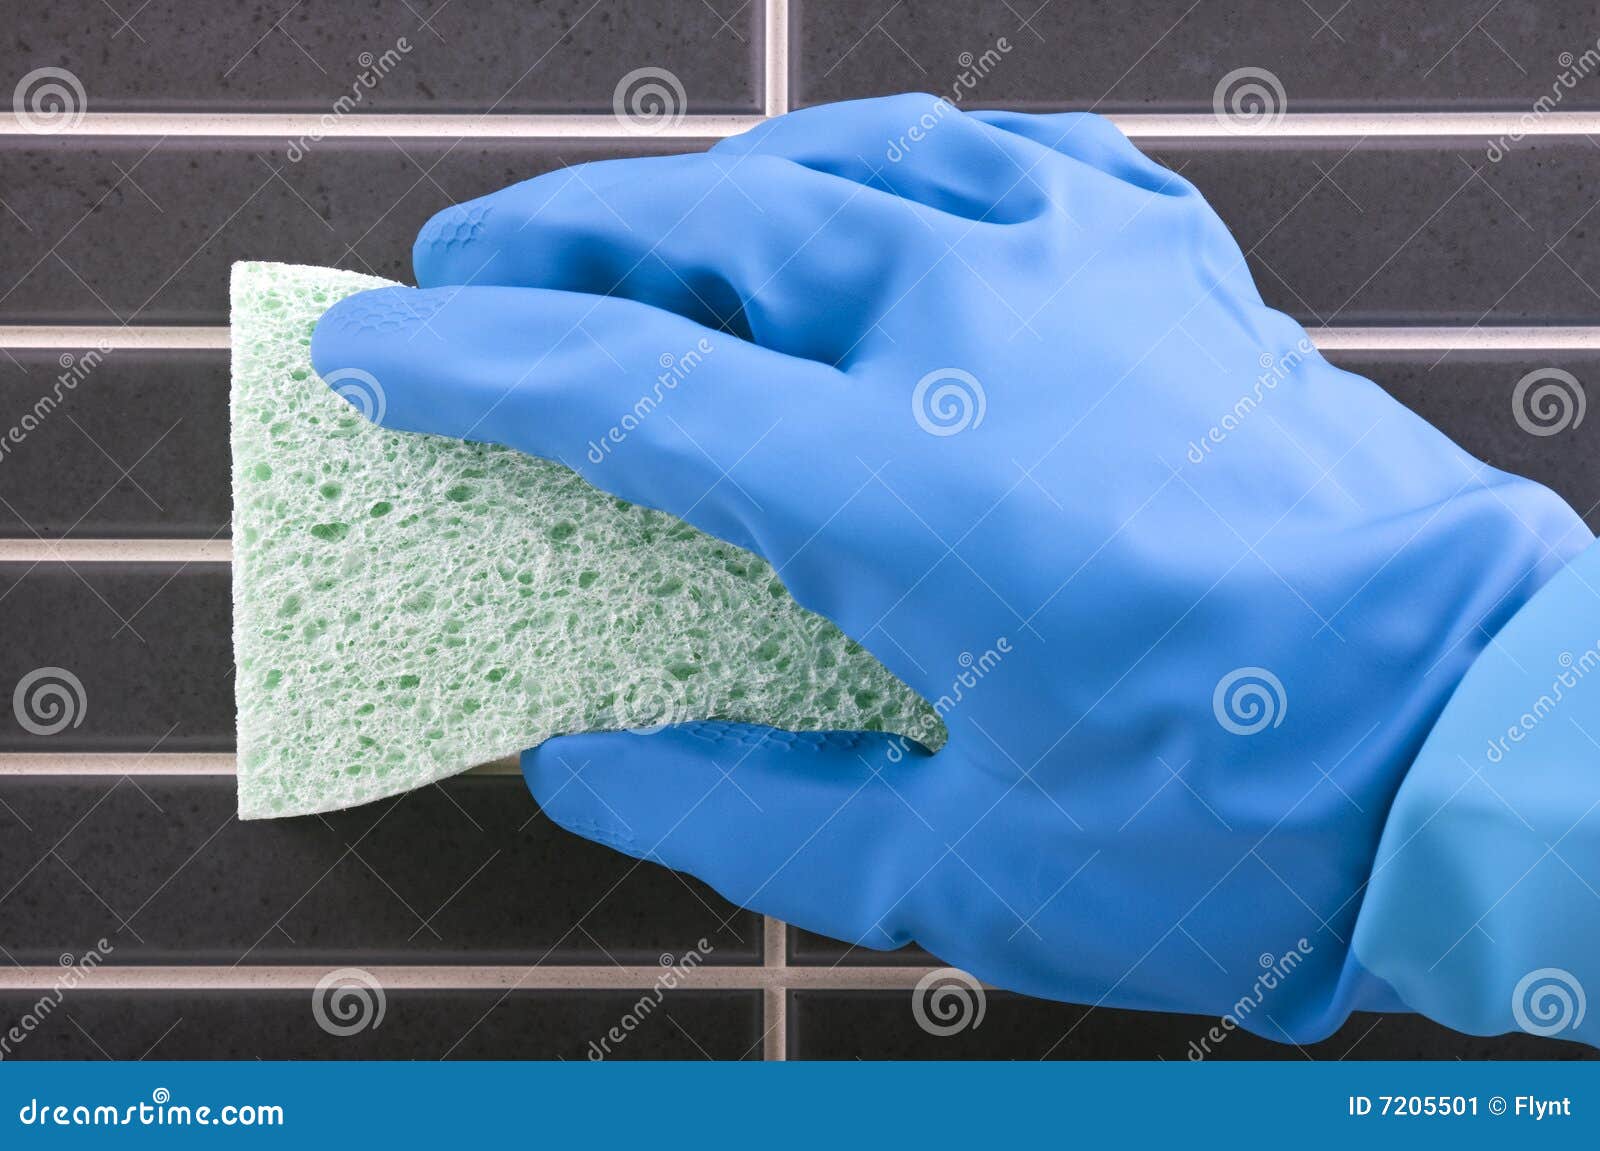 house cleaning - scrubbing tiles